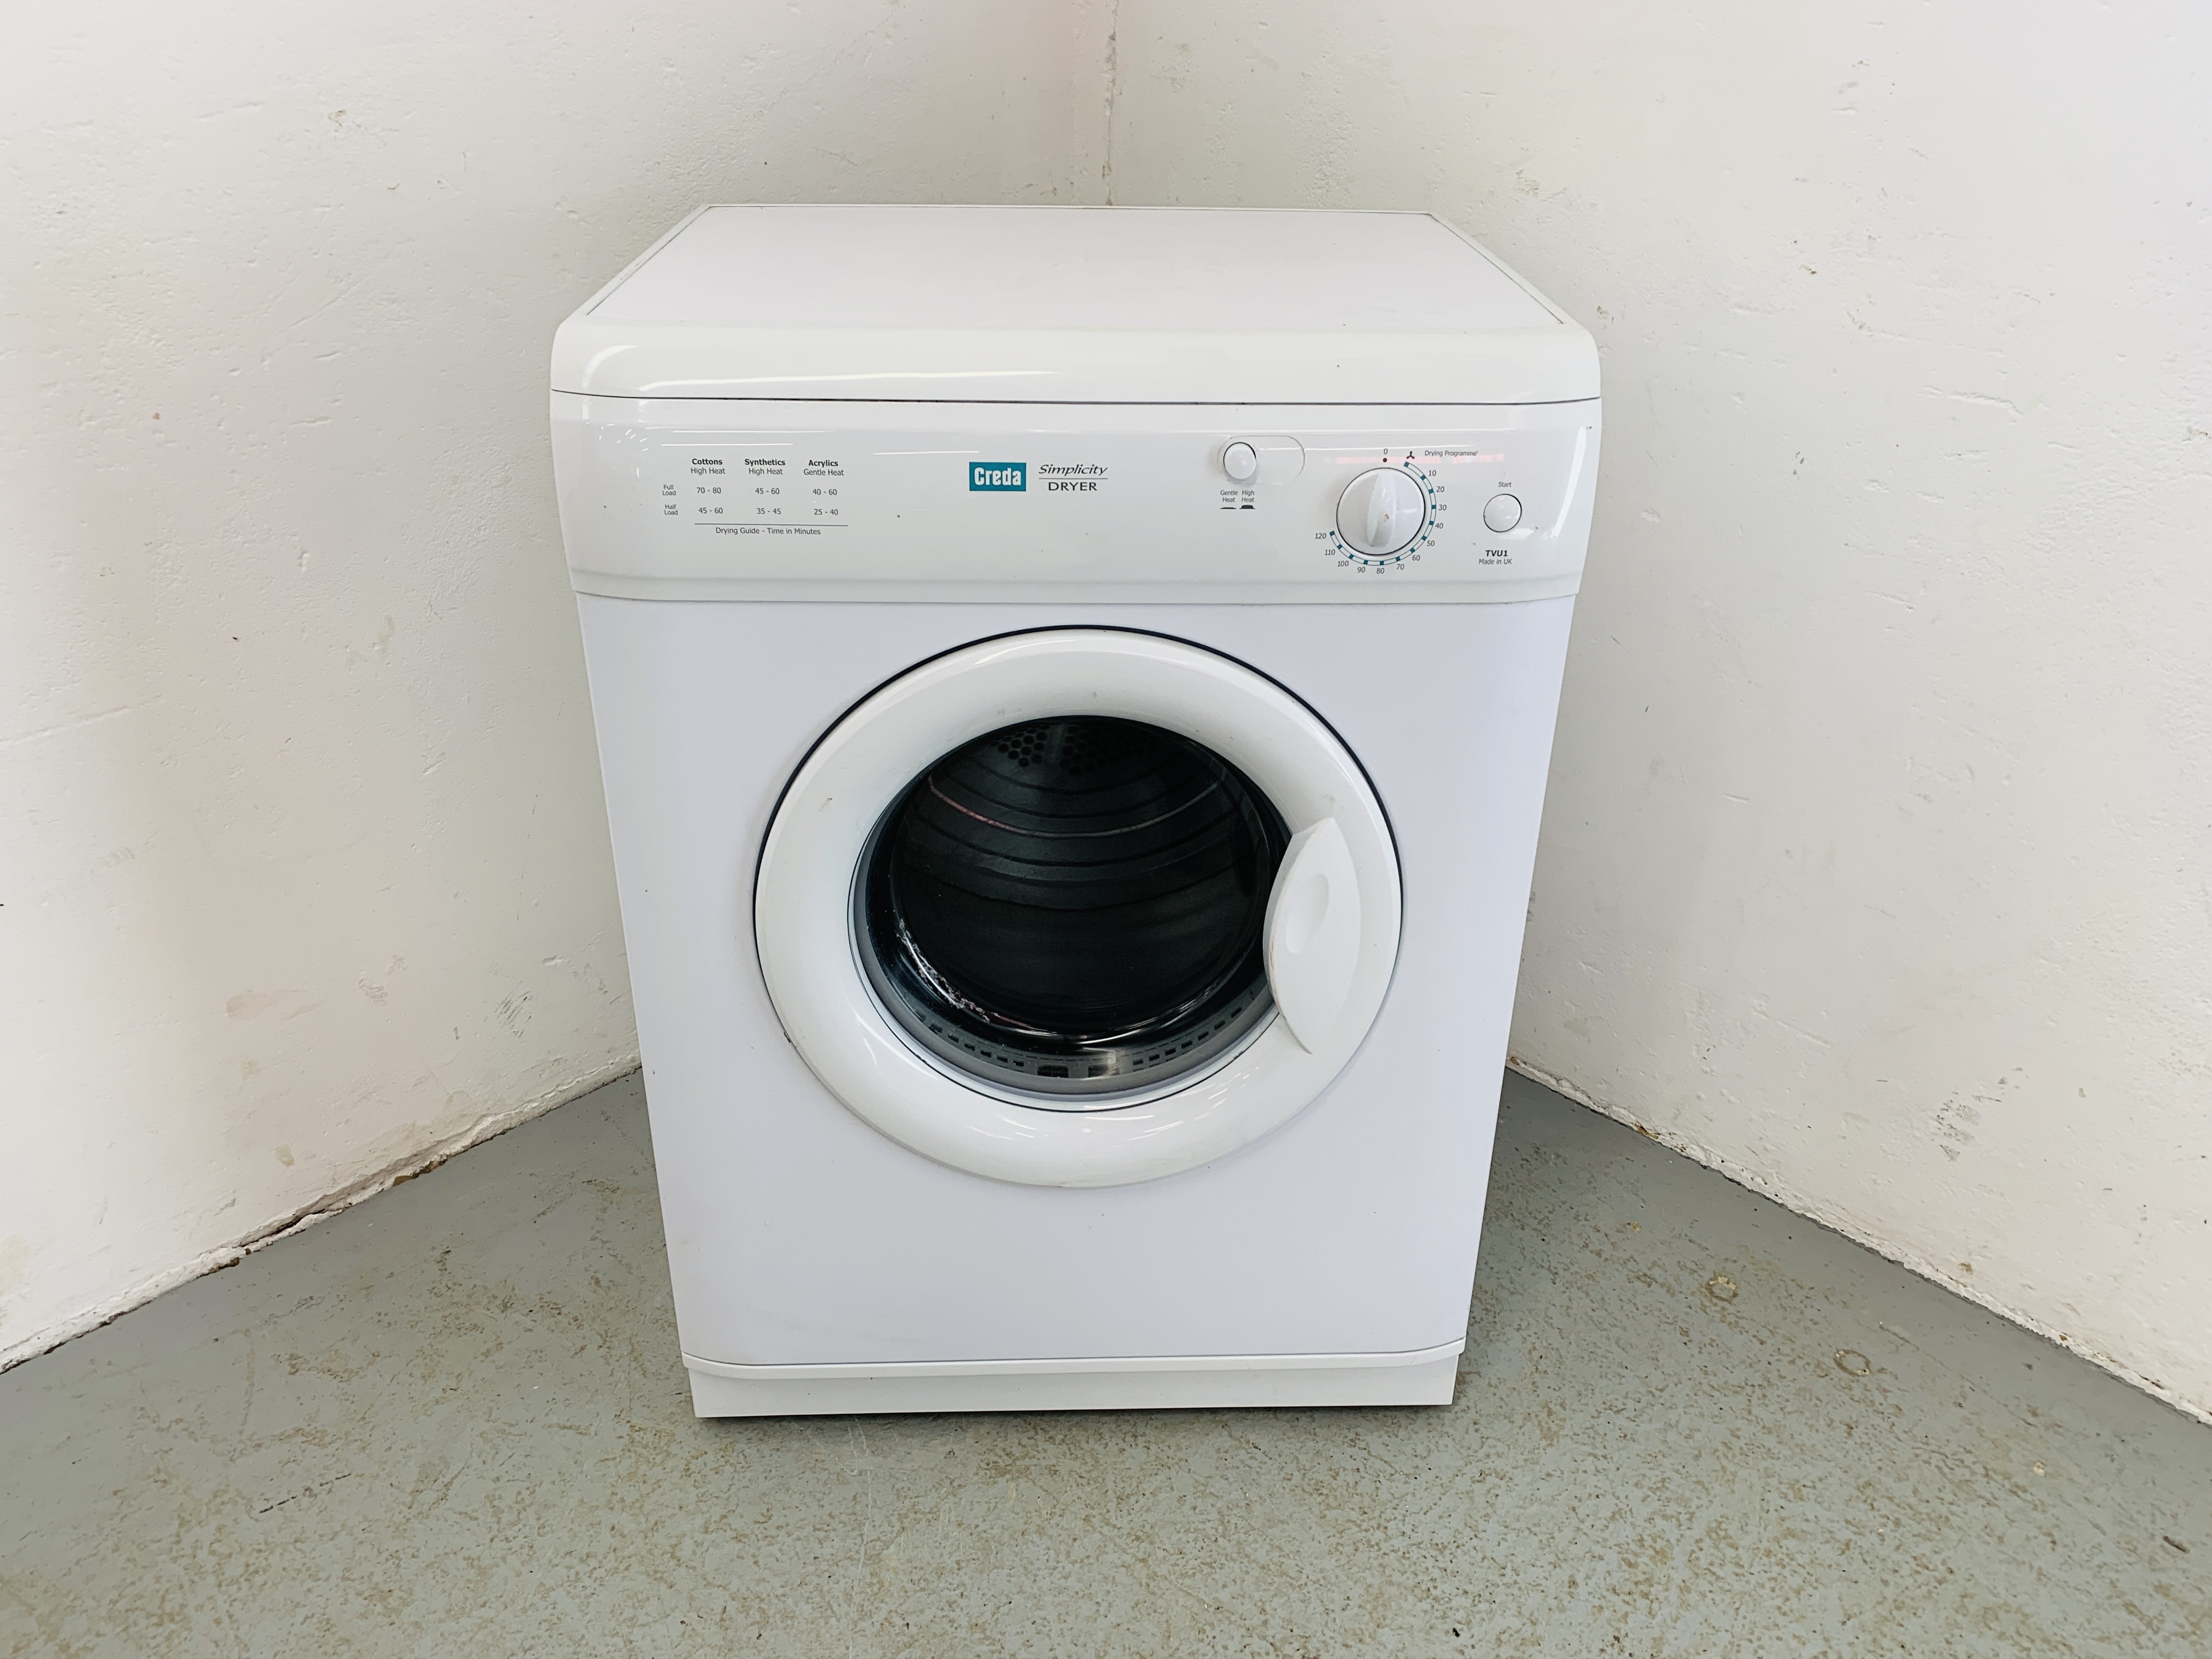 A CREDA SIMPLICITY TUMBLE DRYER - SOLD AS SEEN